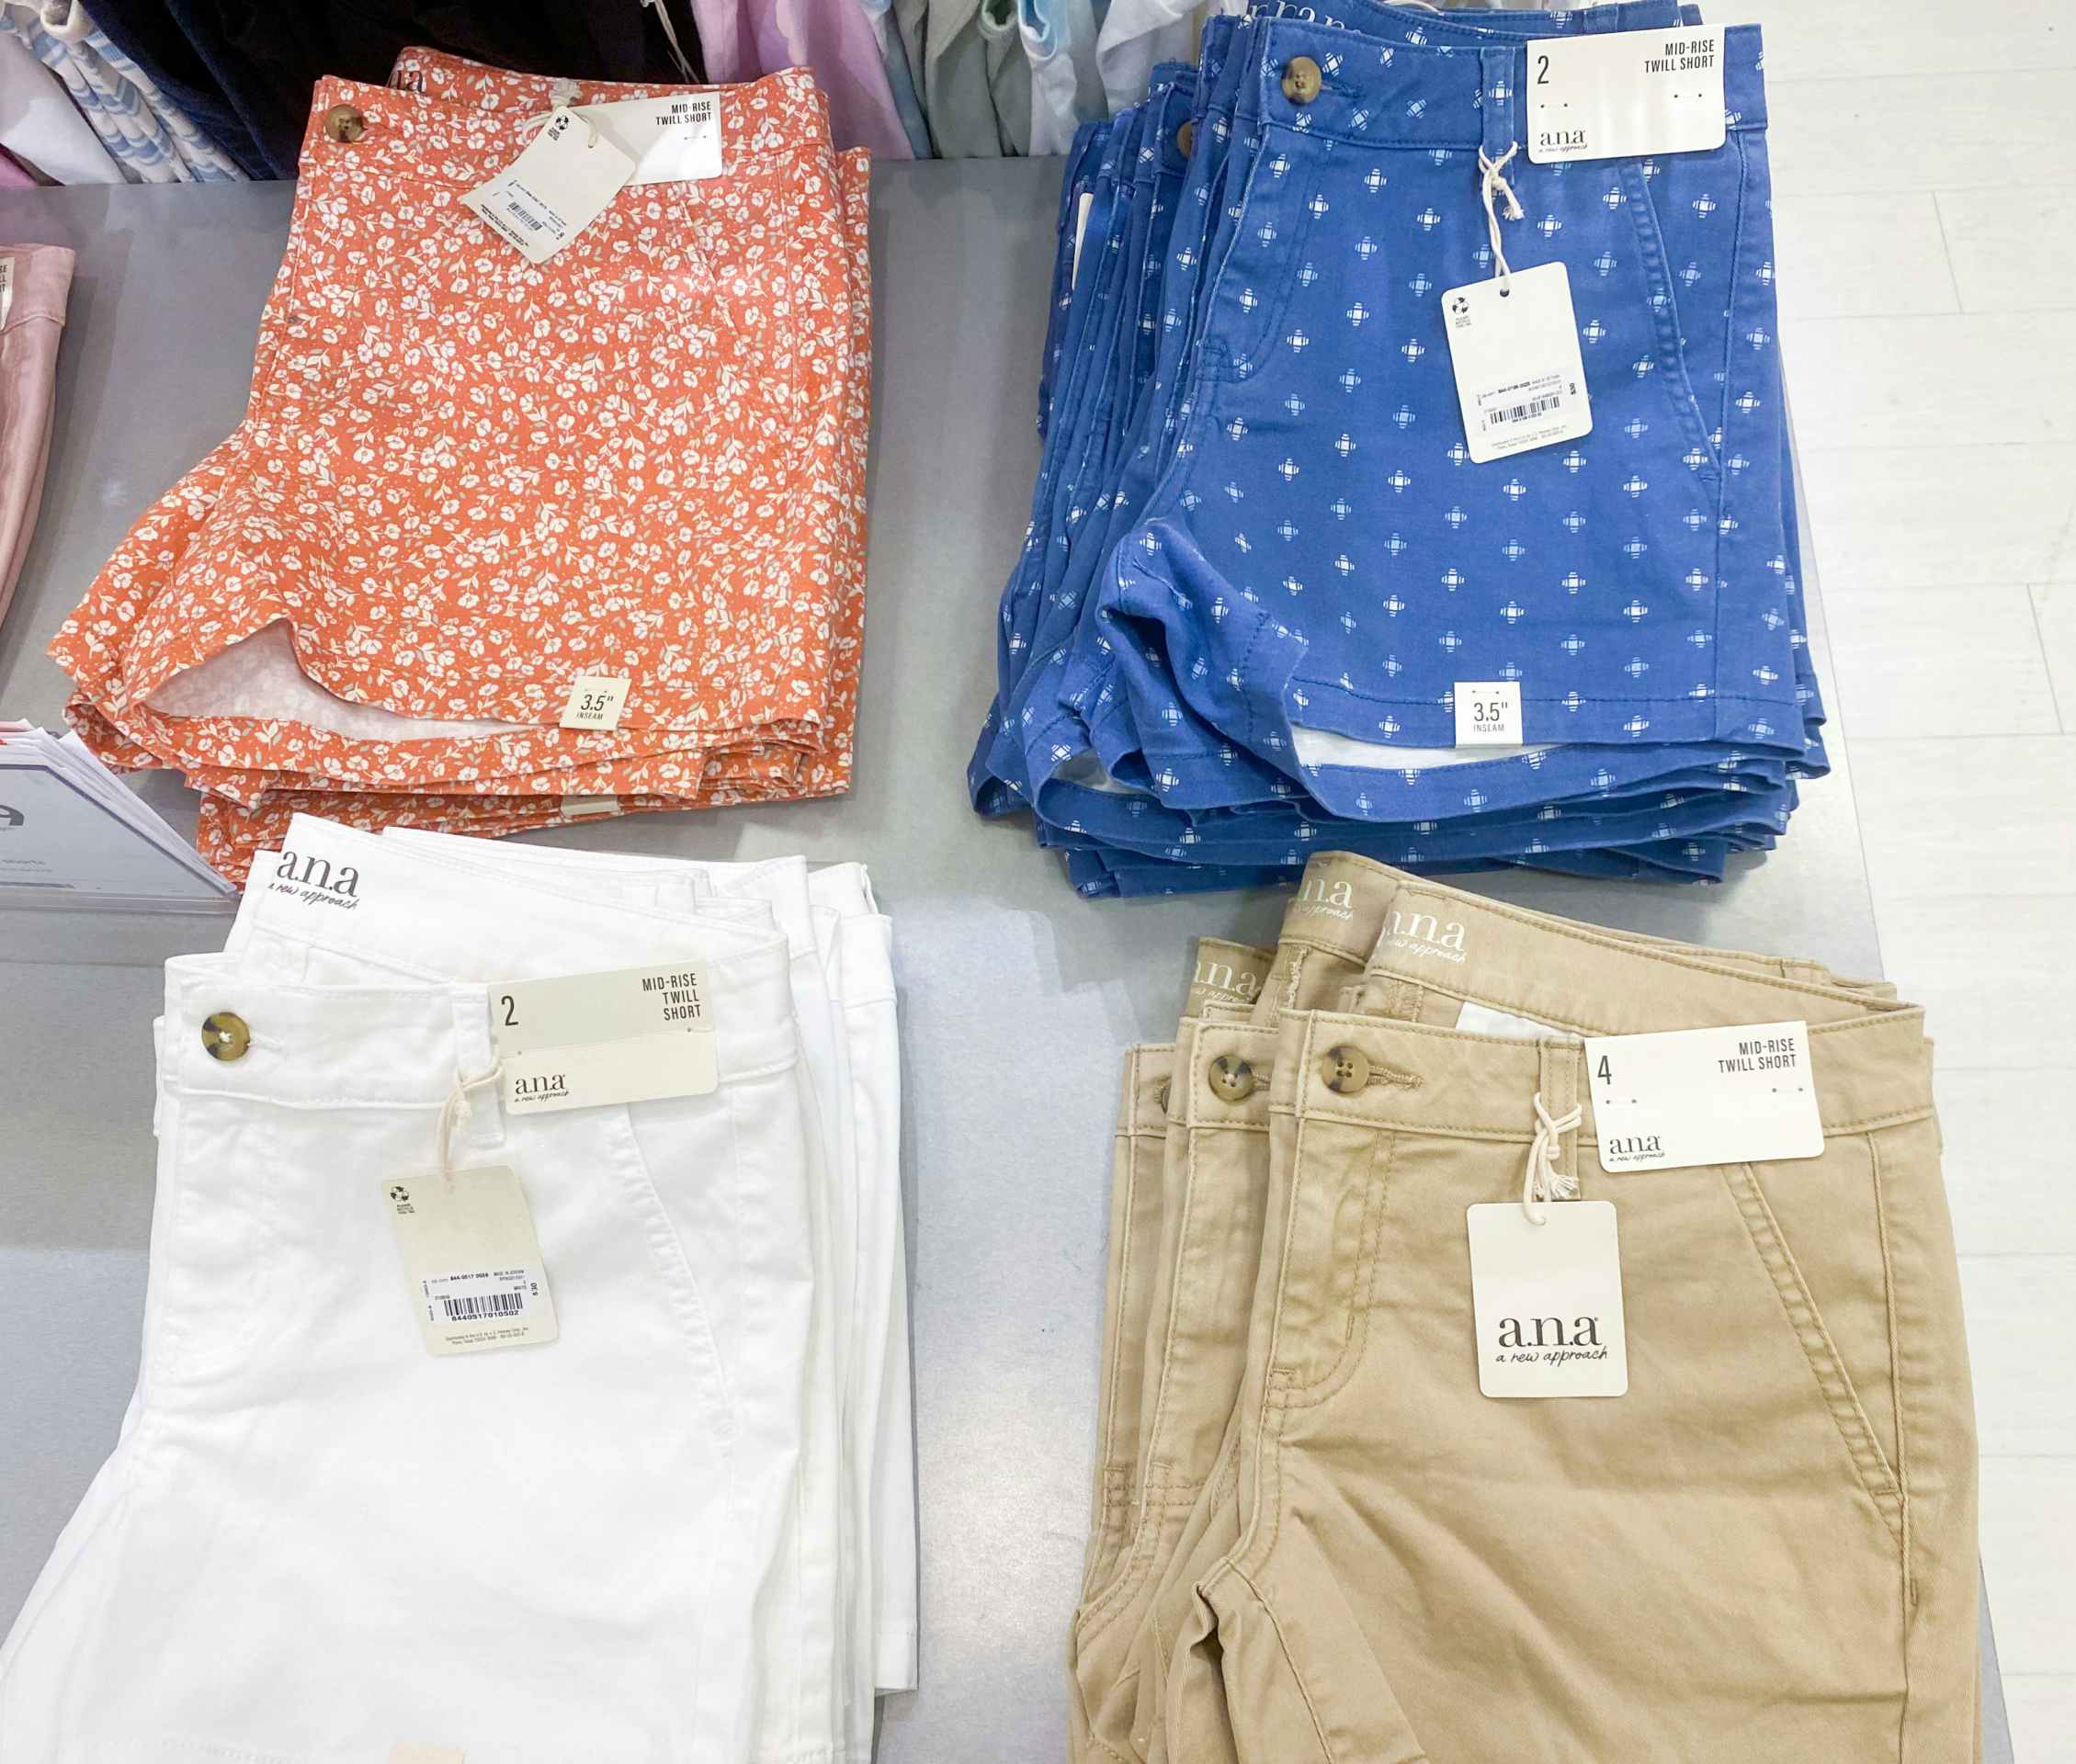 Women's Shorts, as Low as $15 and $10 Men's Shorts at JCPenney